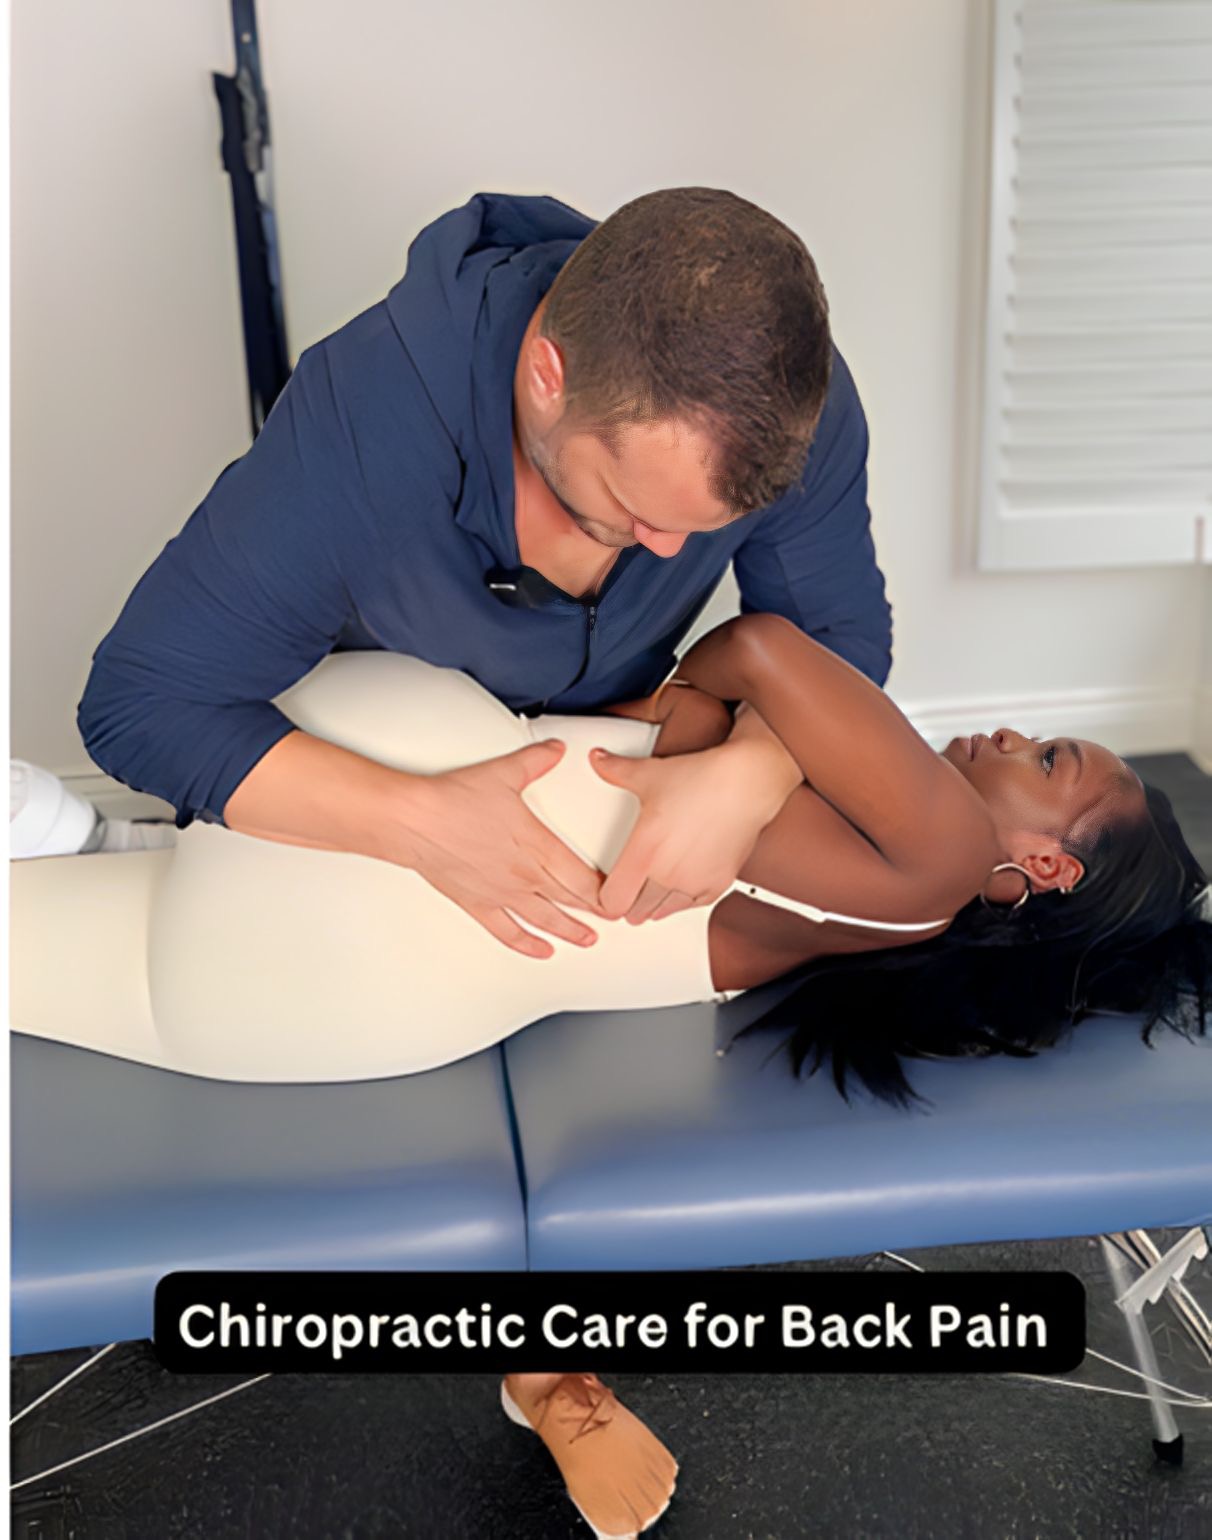 Chiropractor in Los Angeles adjusting a patient with low back pain